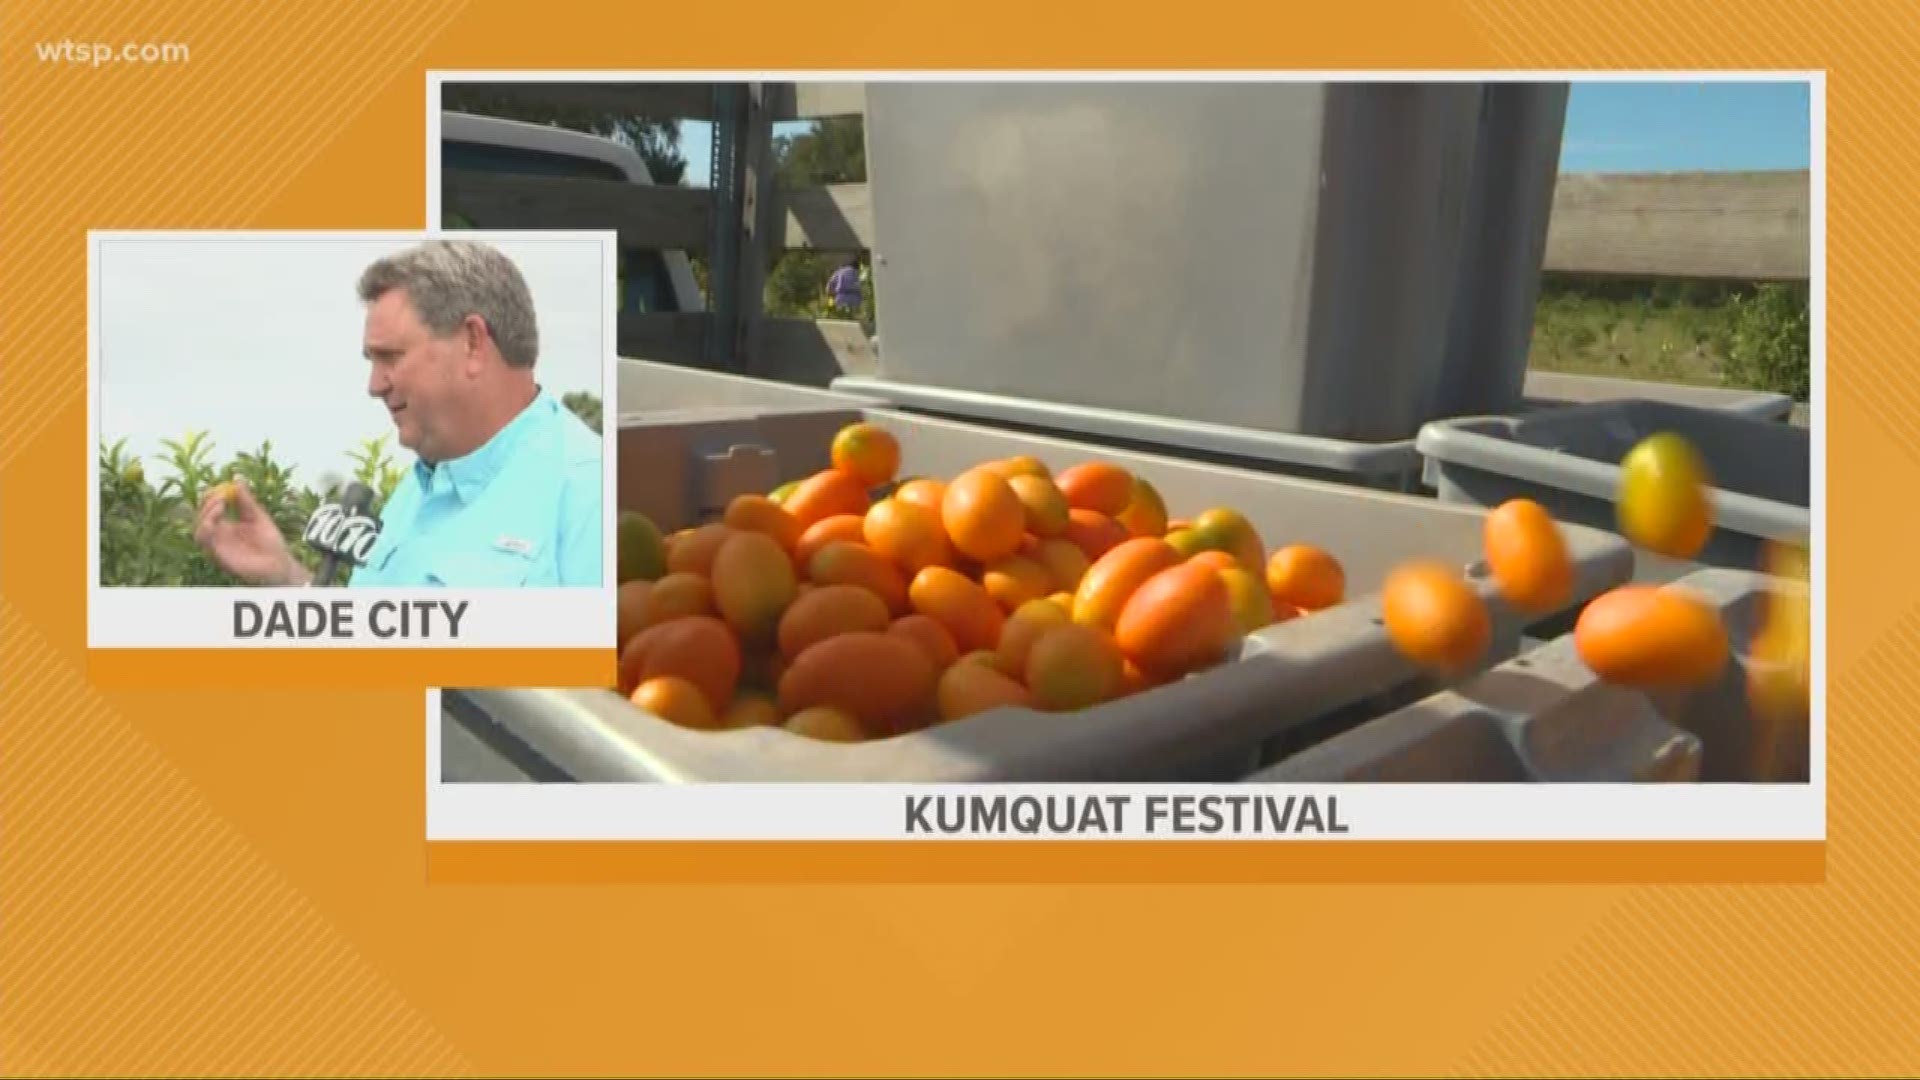 With more than 400 vendors, food stands, live entertainment and of course, lots of kumquats, the annual Kumquat Festival is happening next weekend.